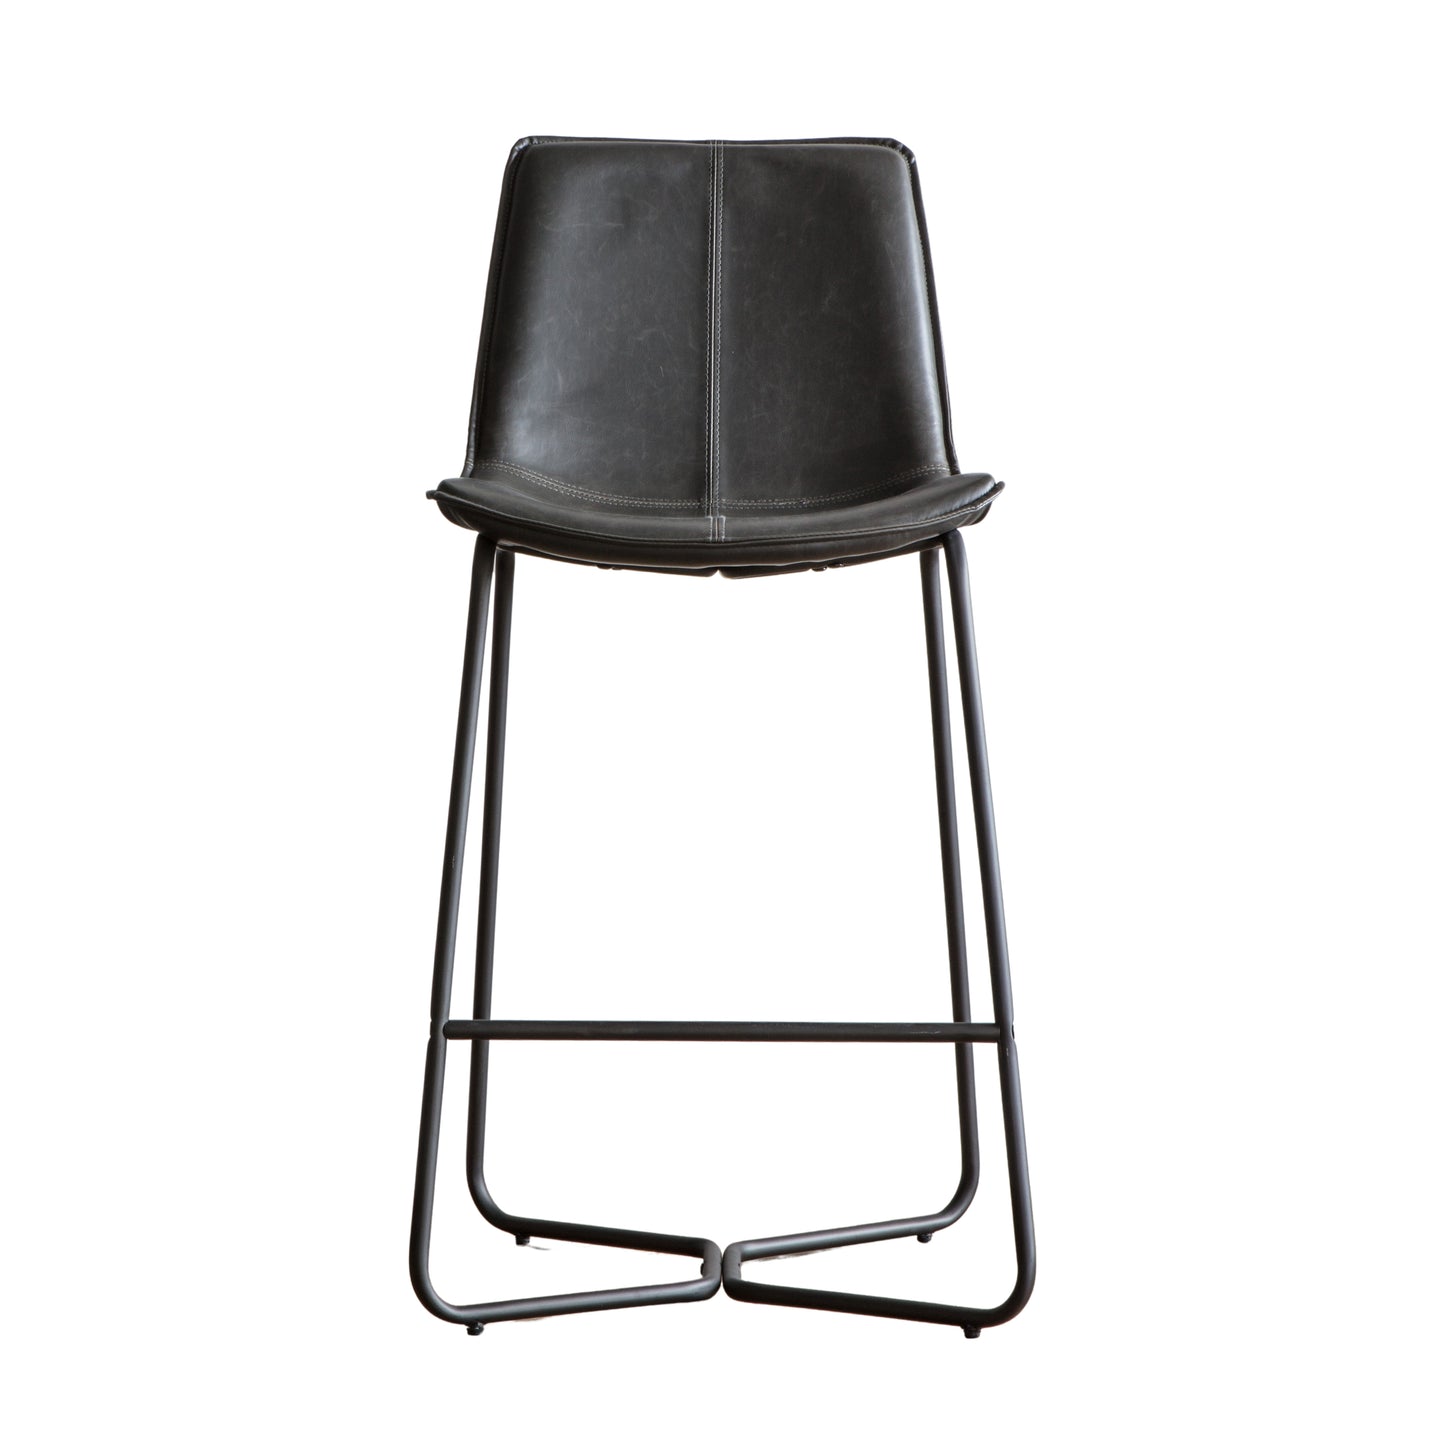 A Slapton Stool Charcoal (2pk) 480x550x975mm with a metal frame for interior decor.